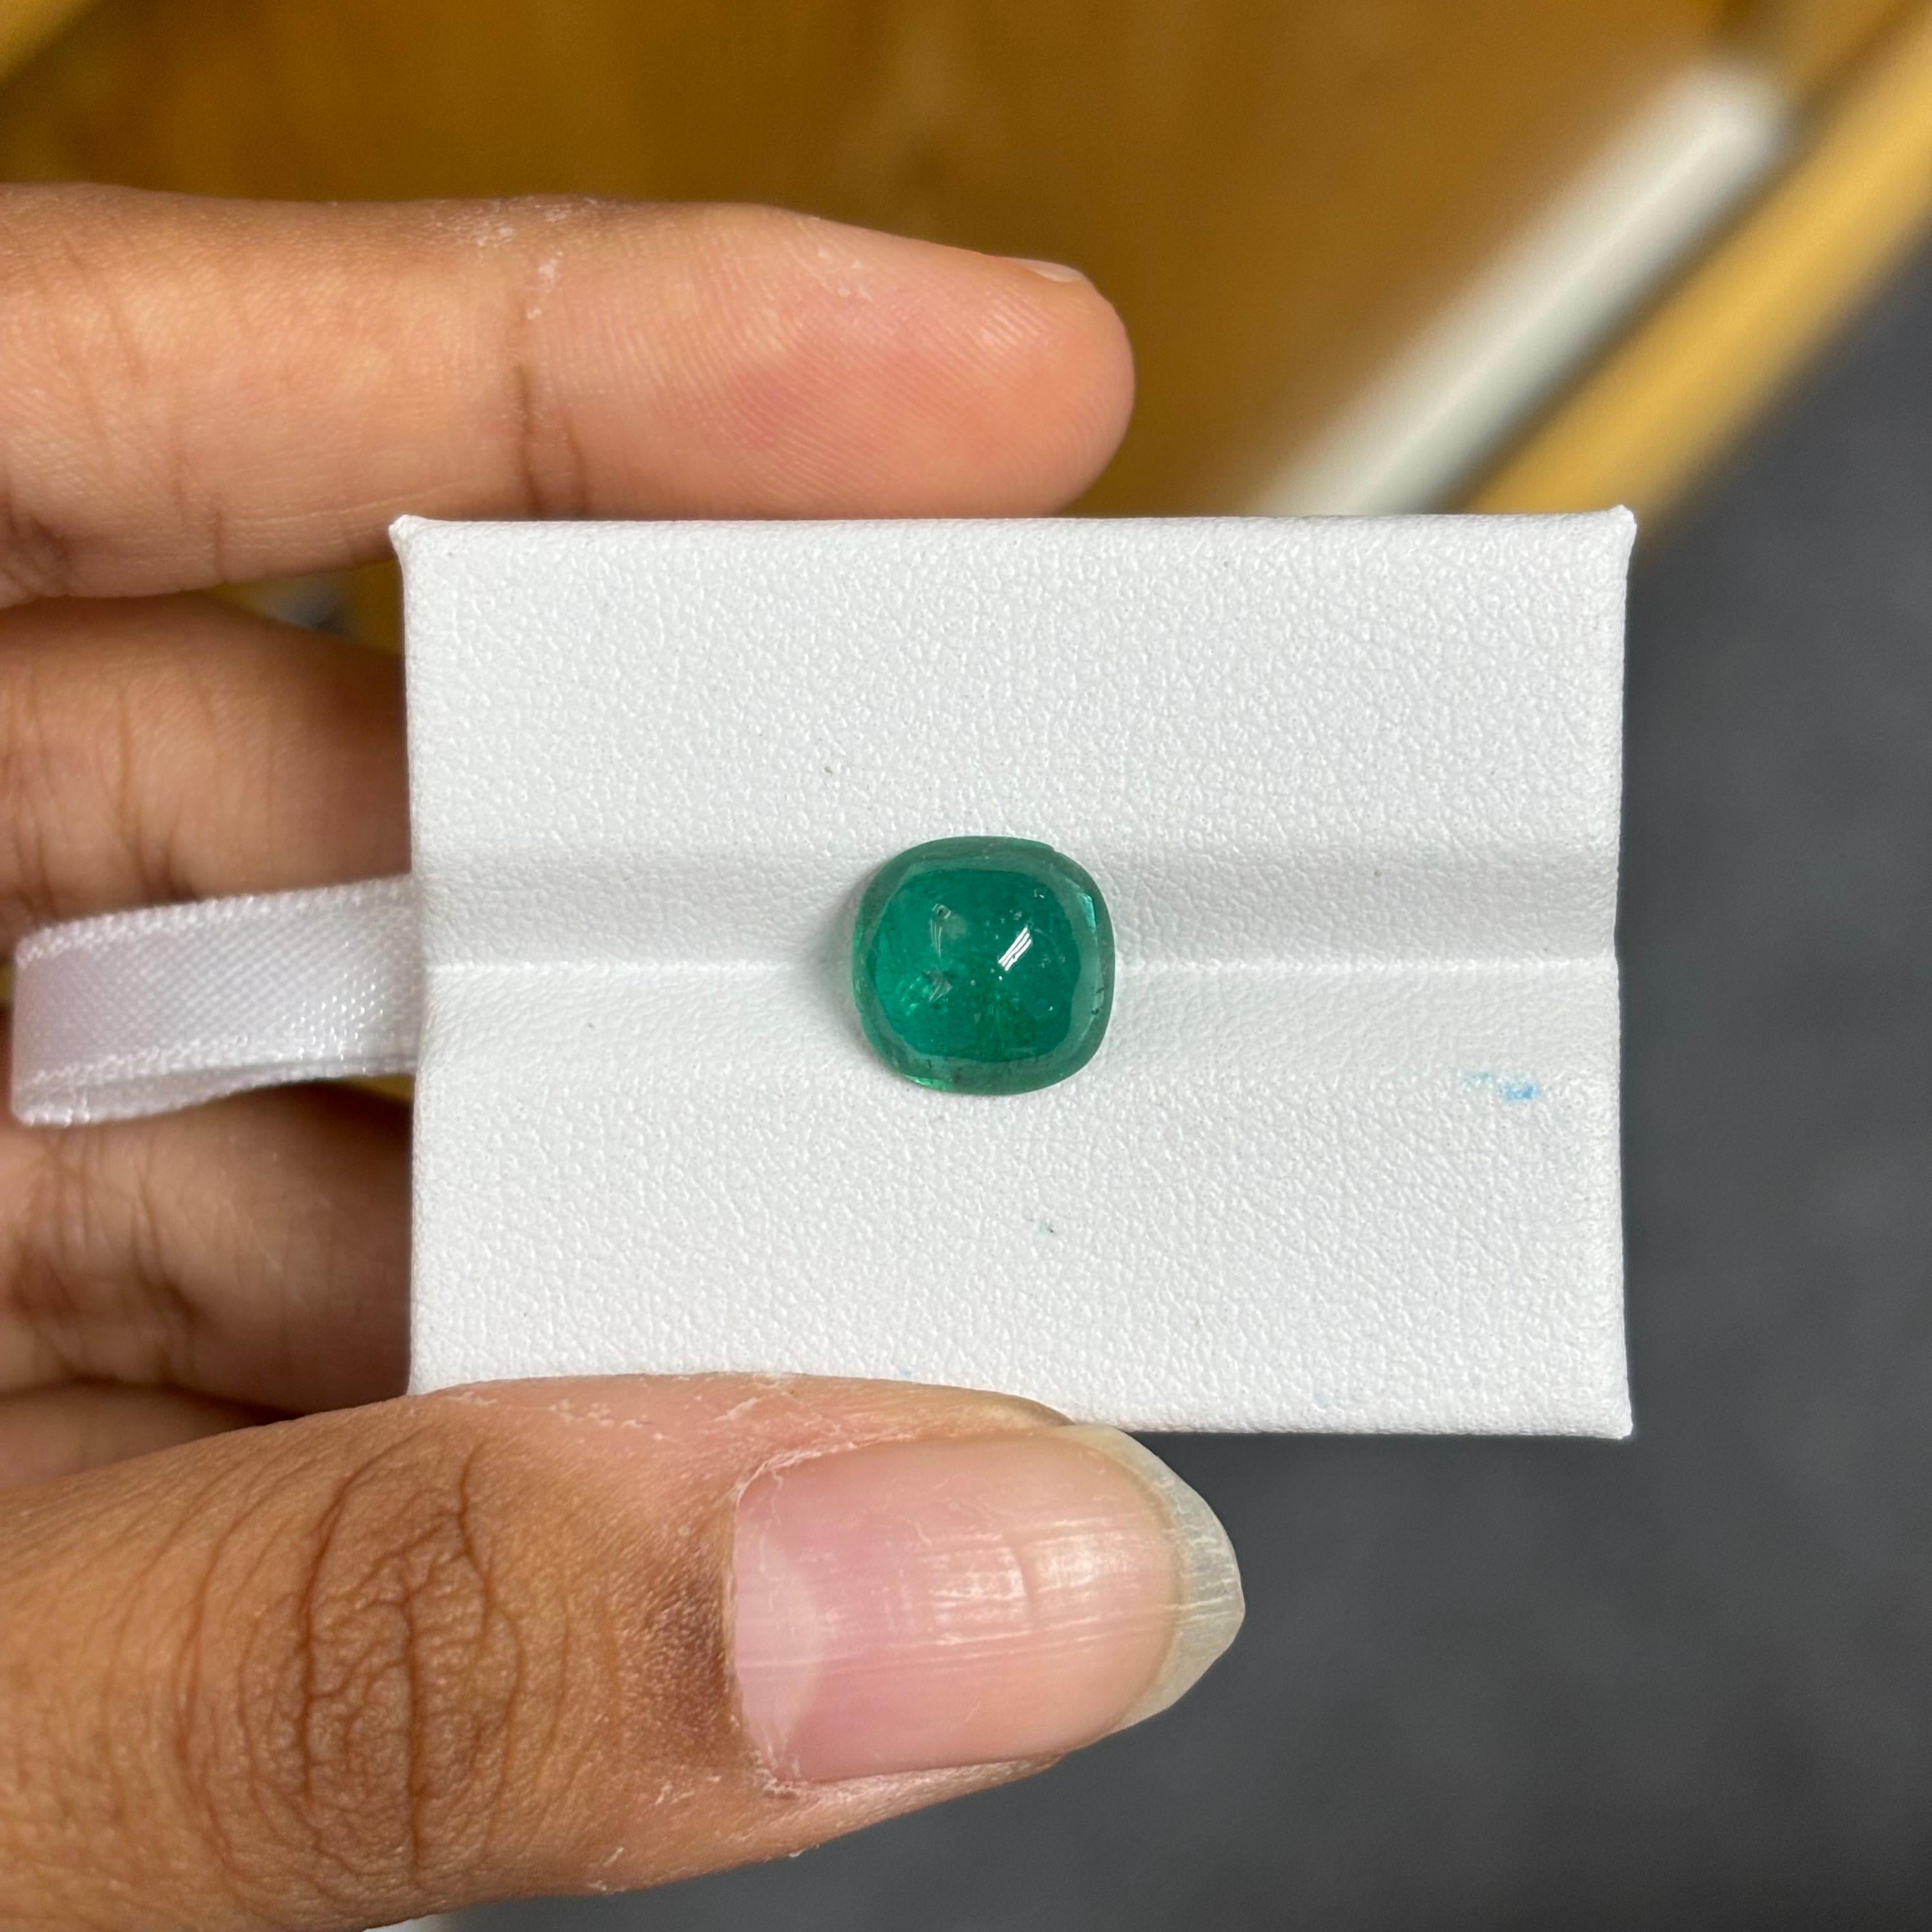 A stunning 2.86 Carat Emerald stone that is a gorgeous shade of vivid green and originates from Zambia. It is completely natural and of good quality. The emerald piece is cut into perfection in a sugarloaf-cut shape.

The green emerald has only